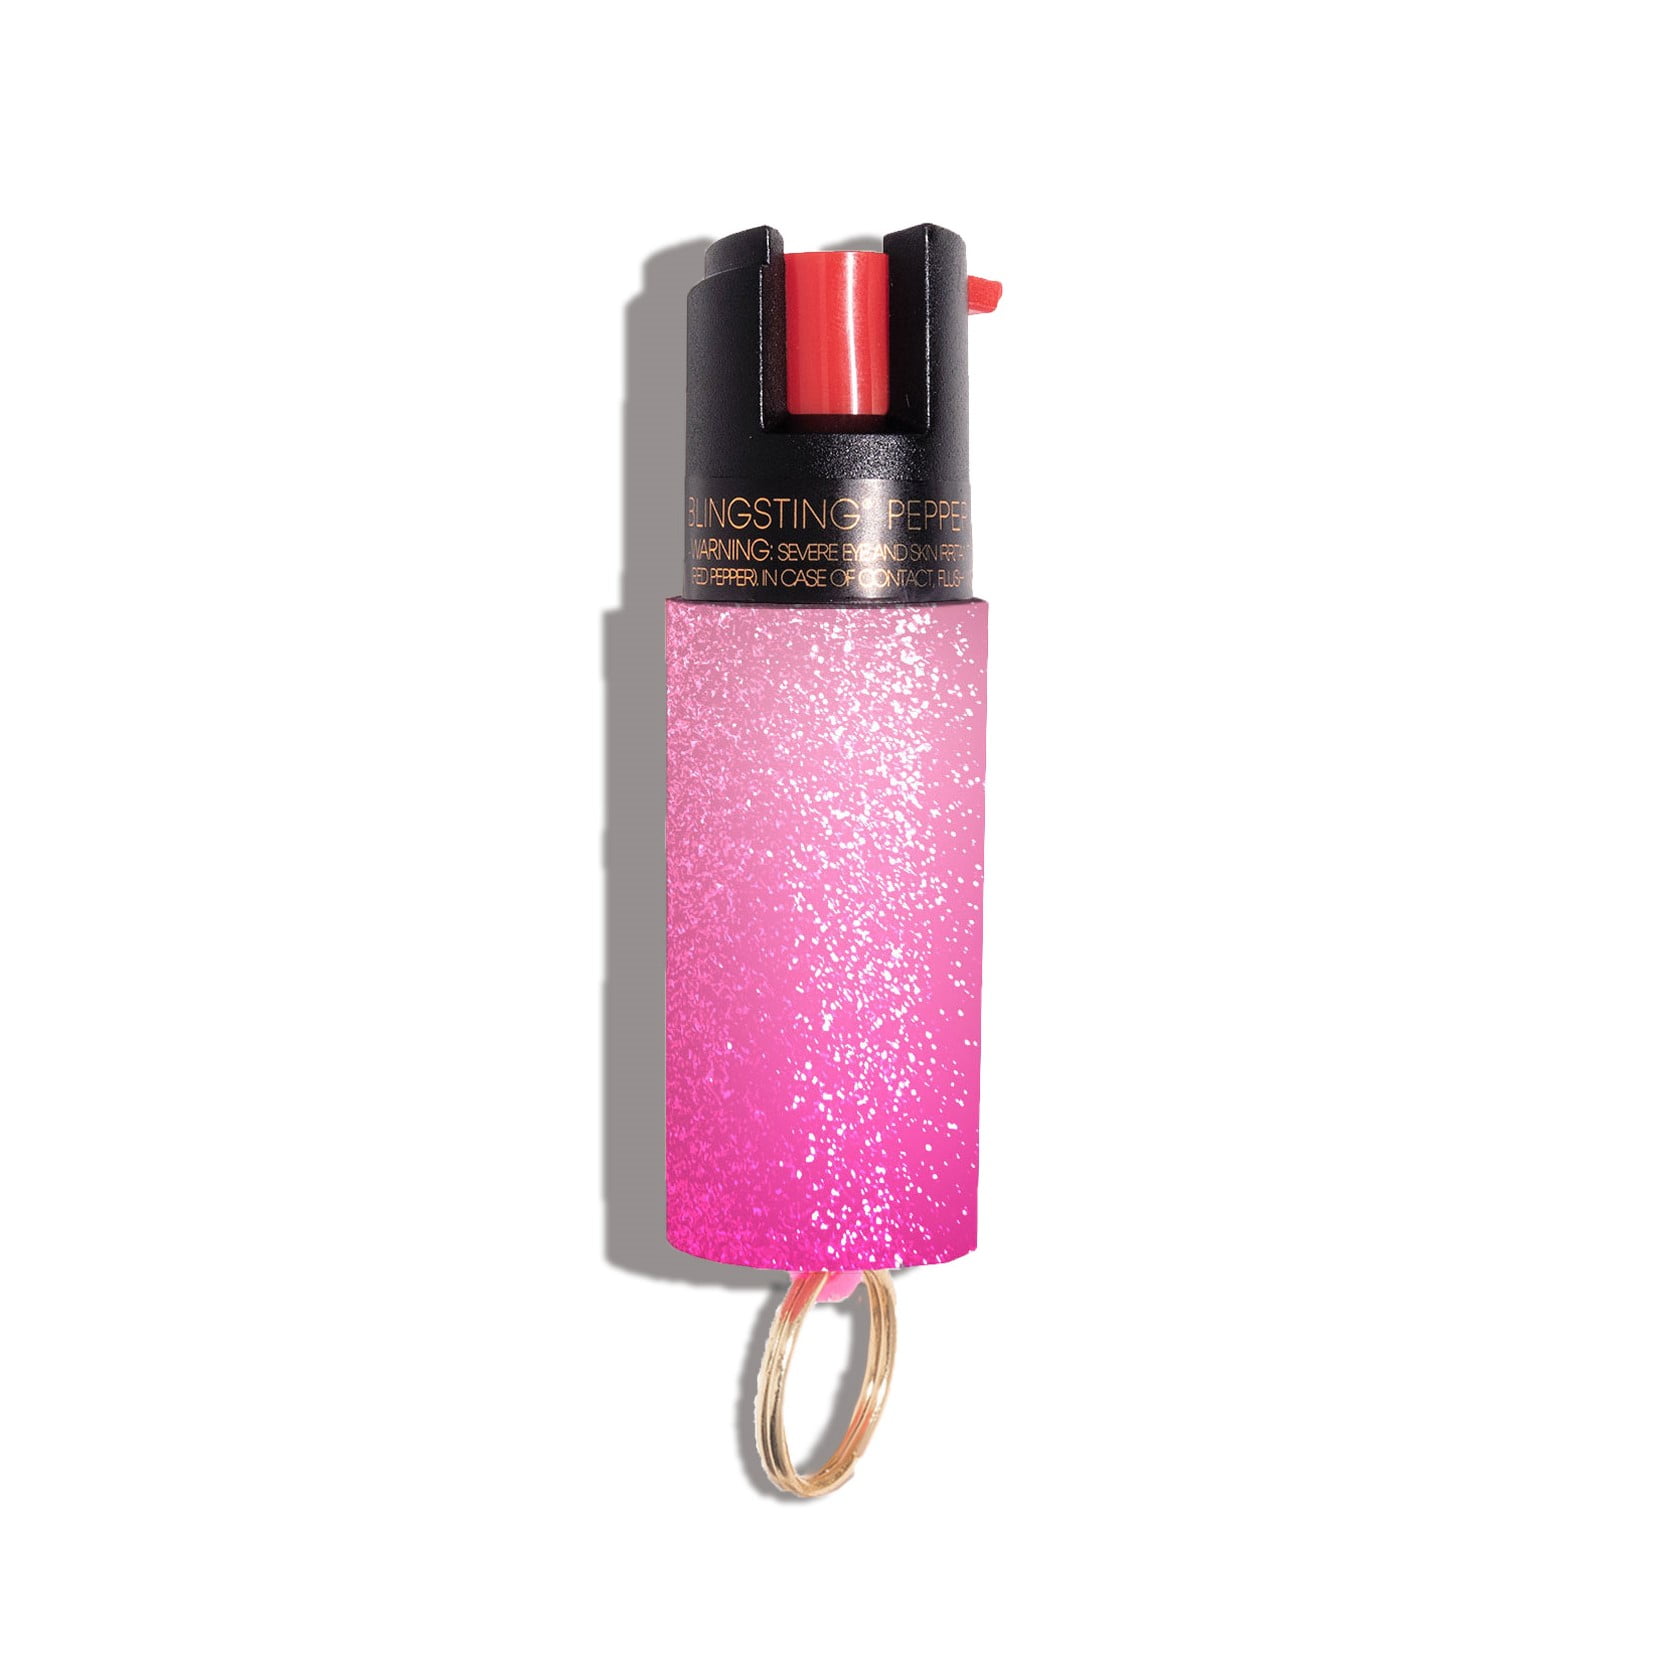 BLINGSTING Essentials Pepper Spray with Key Ring, 0.5 oz, Pink Glitter, 1  in x 1 in x 3 in 